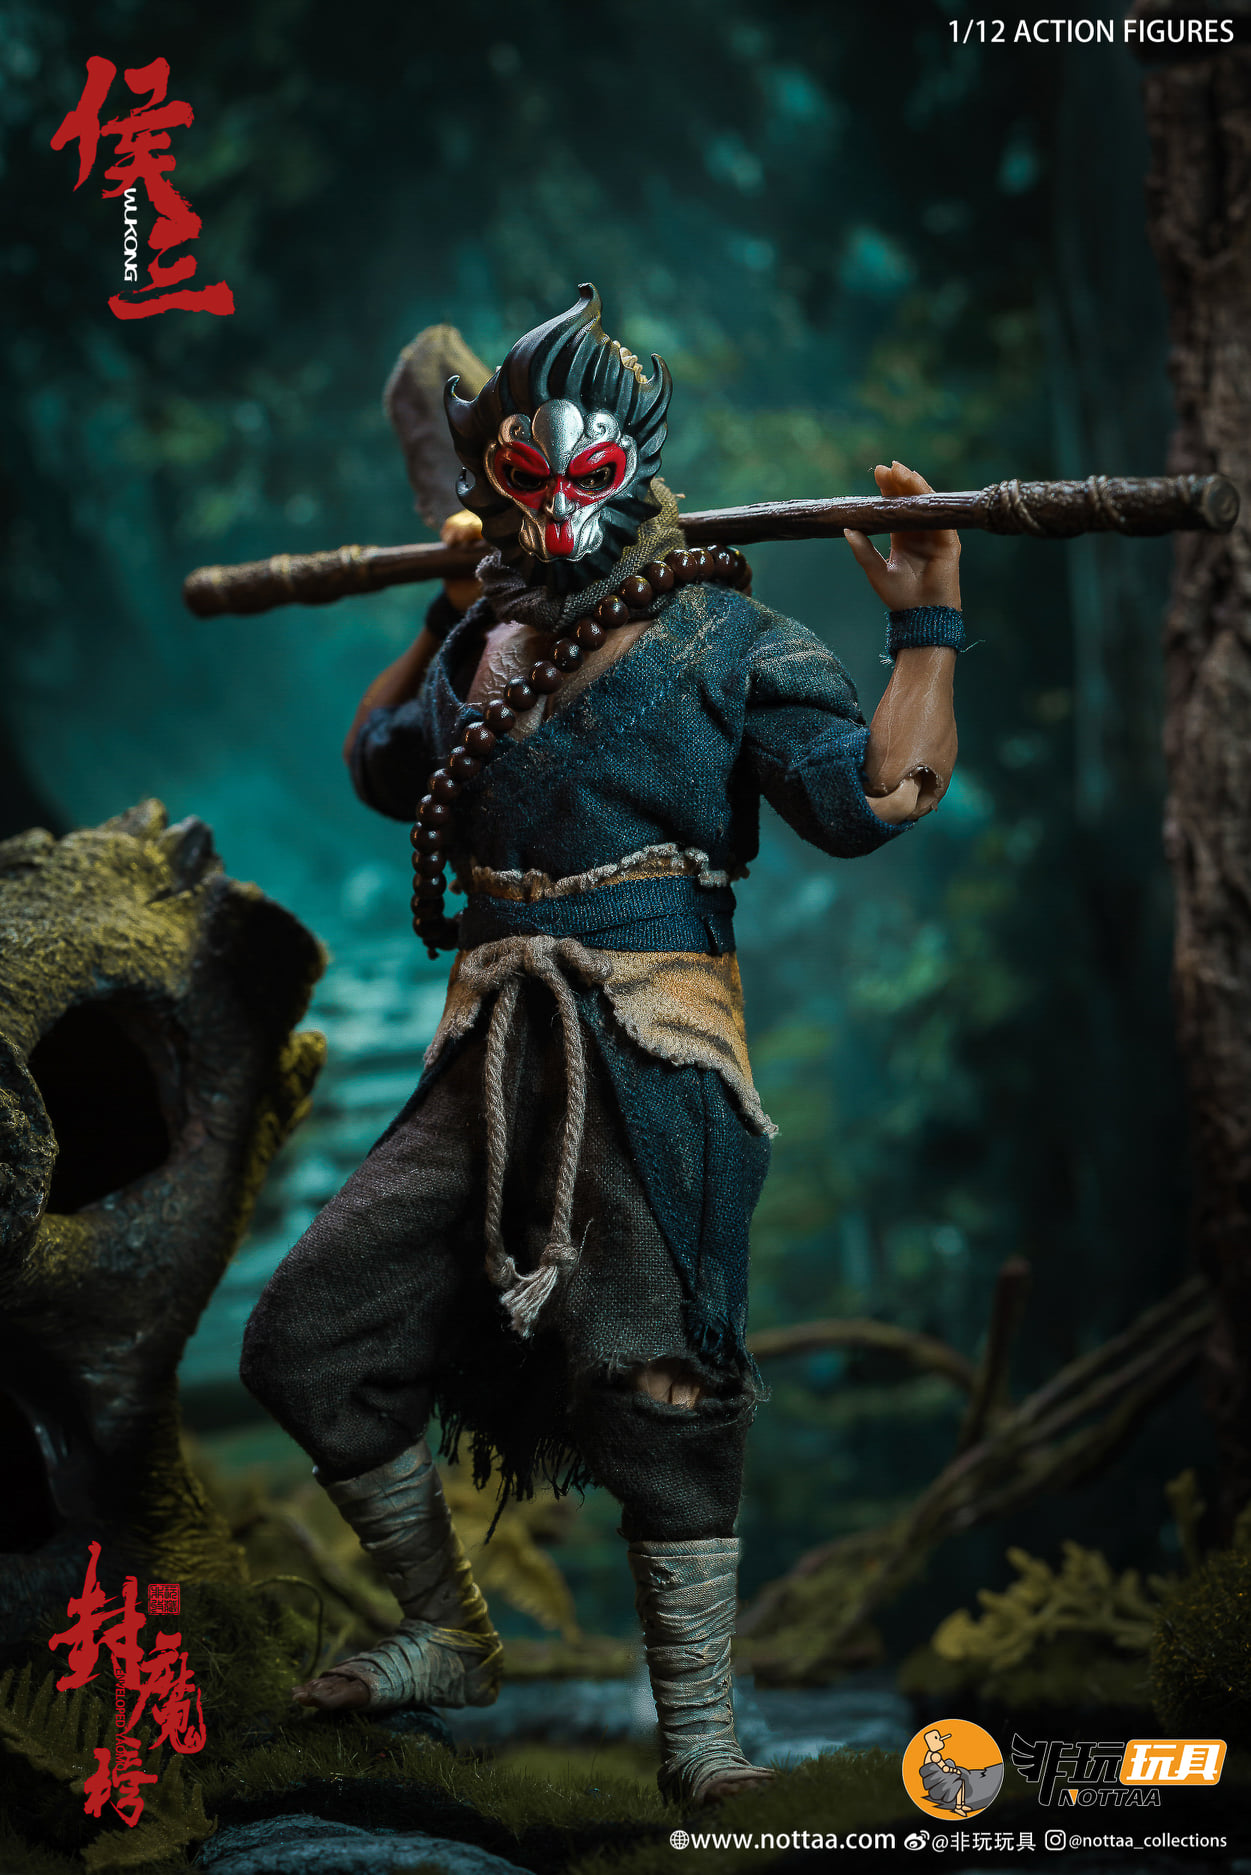 NEW PRODUCT: 1/12 NOTTAA | The Seal of Demons - Martial Artist Monk WUKONG 0435